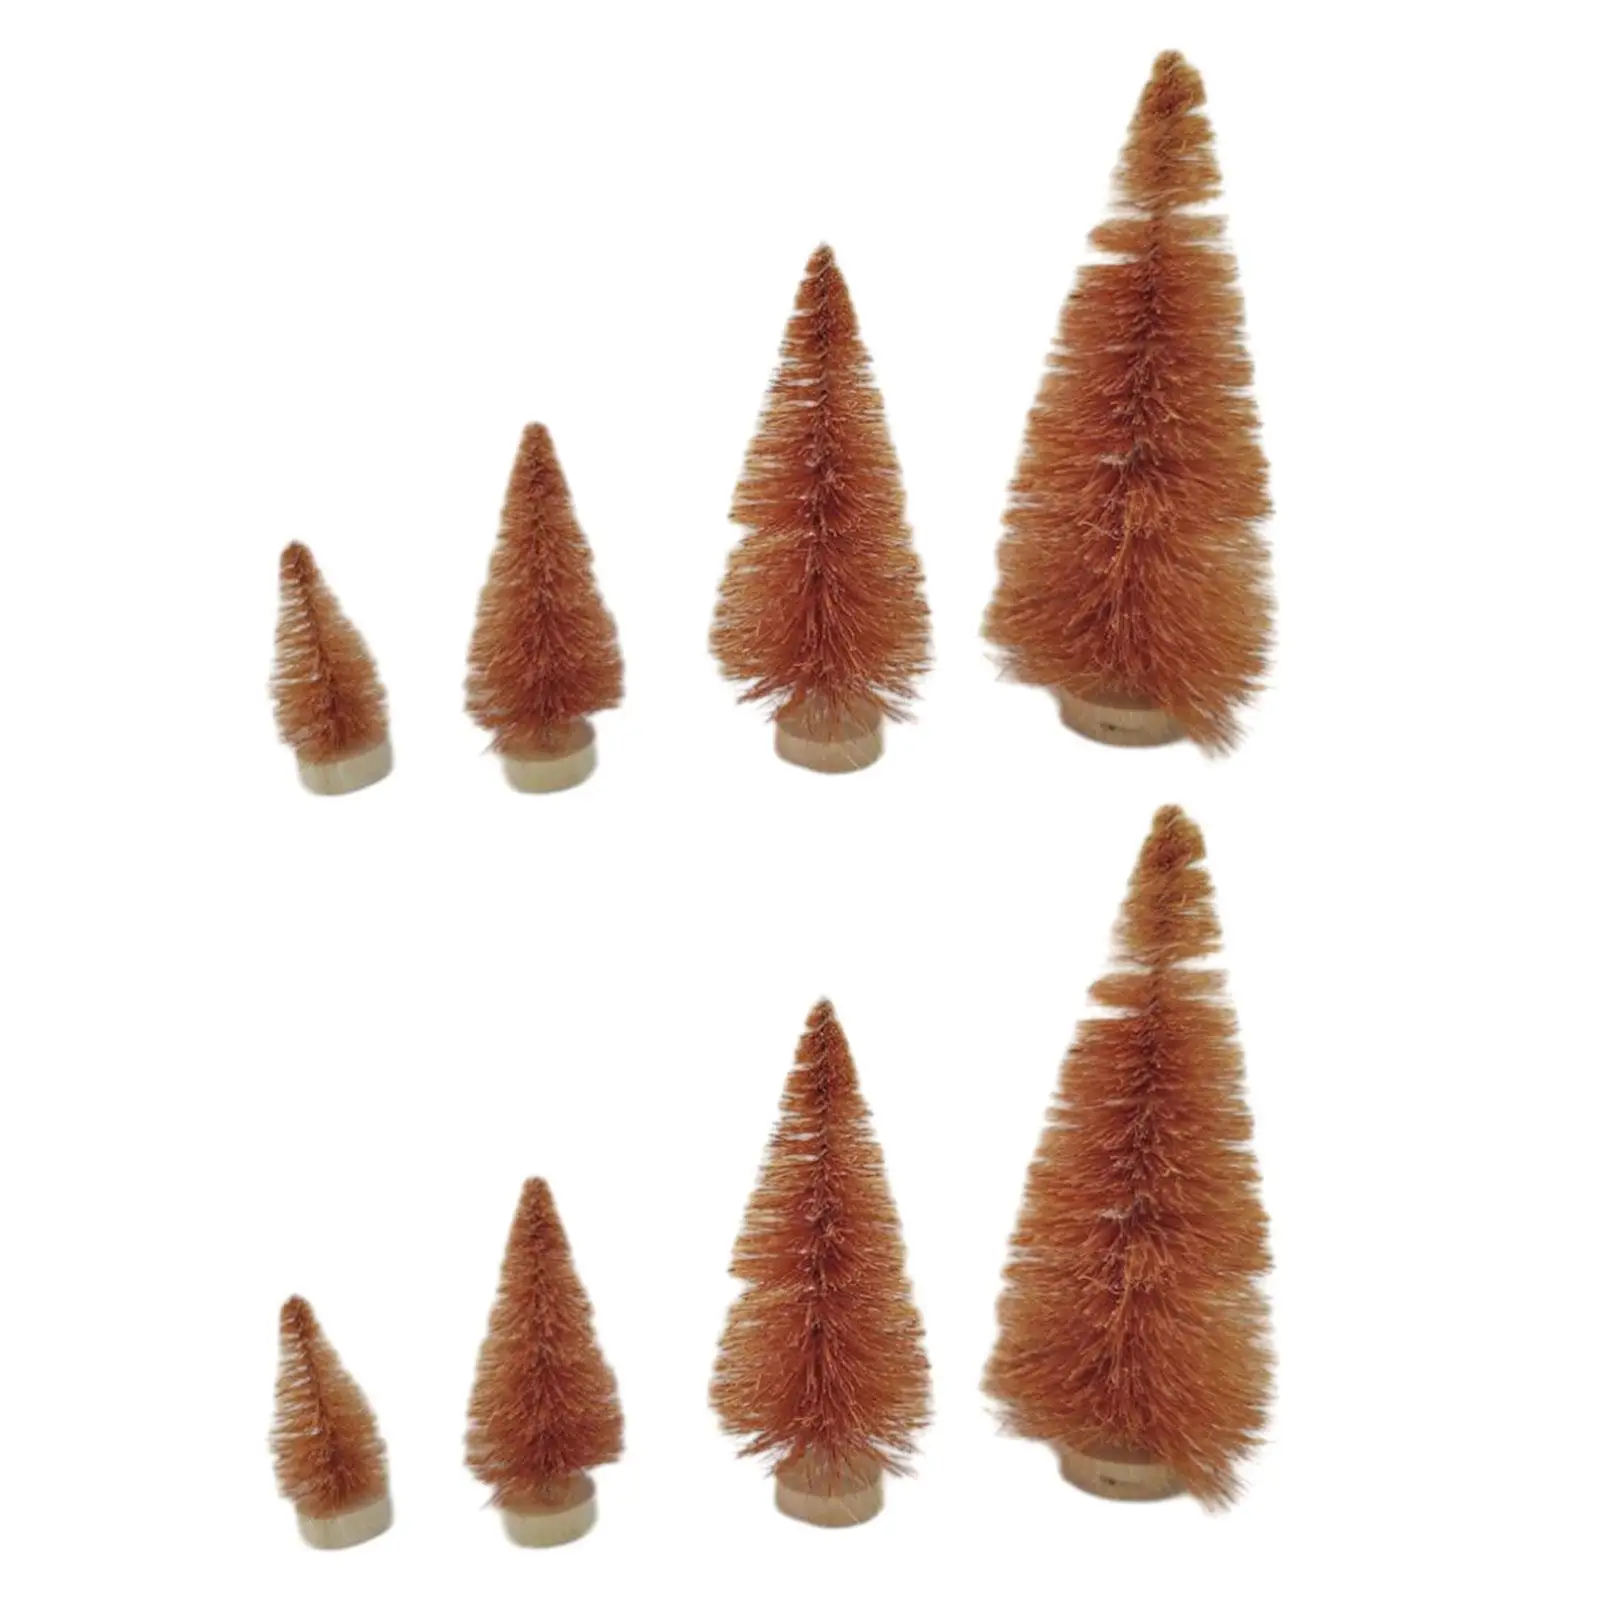 8x Artificial Christmas Tree Brush Trees Desktop Miniature Wood Base Christmas Decorations Pine Trees for Indoor Home Holiday